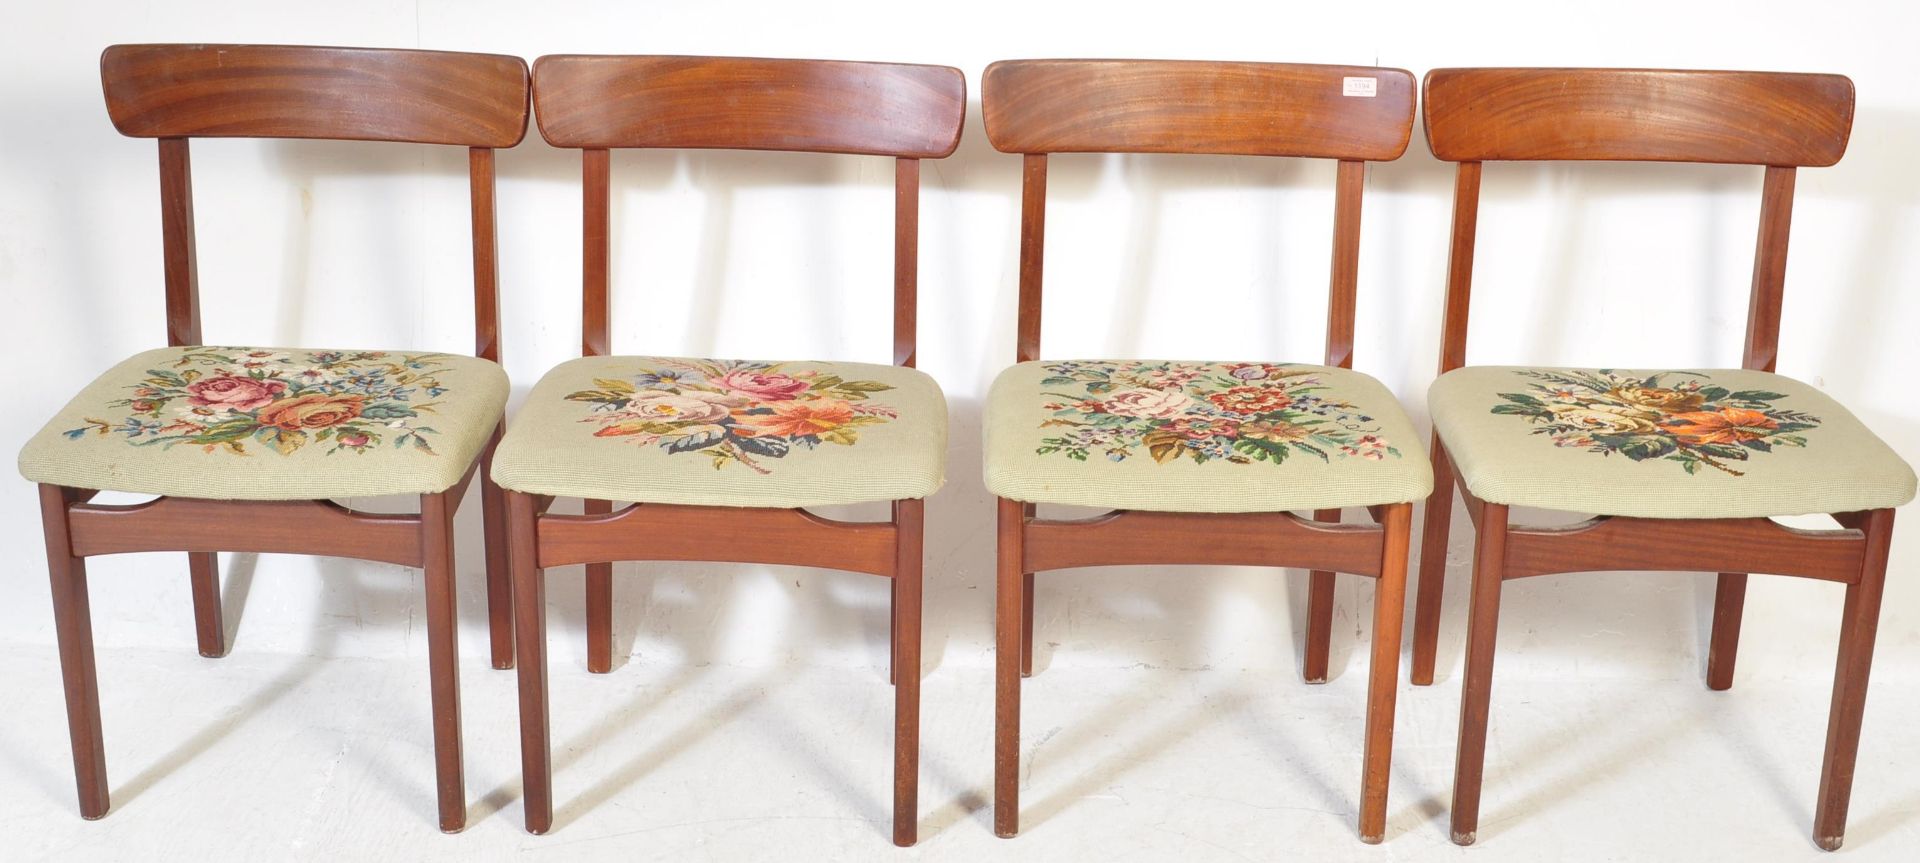 SET OF RETRO 1960S DANISH INFLUENCE DINING CHAIRS - Image 2 of 7